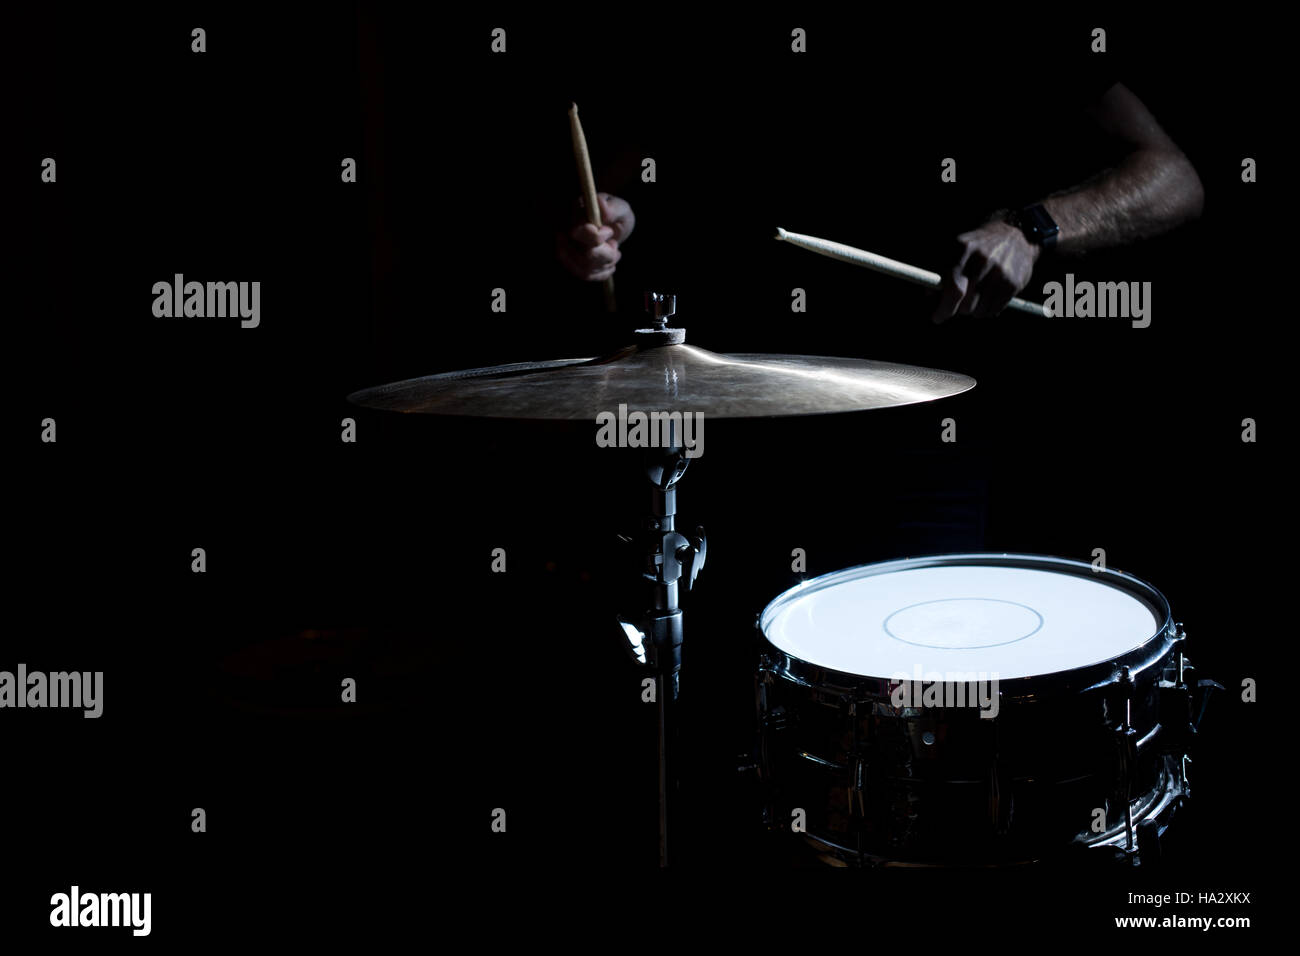 Man playing drums and cymbal Stock Photo